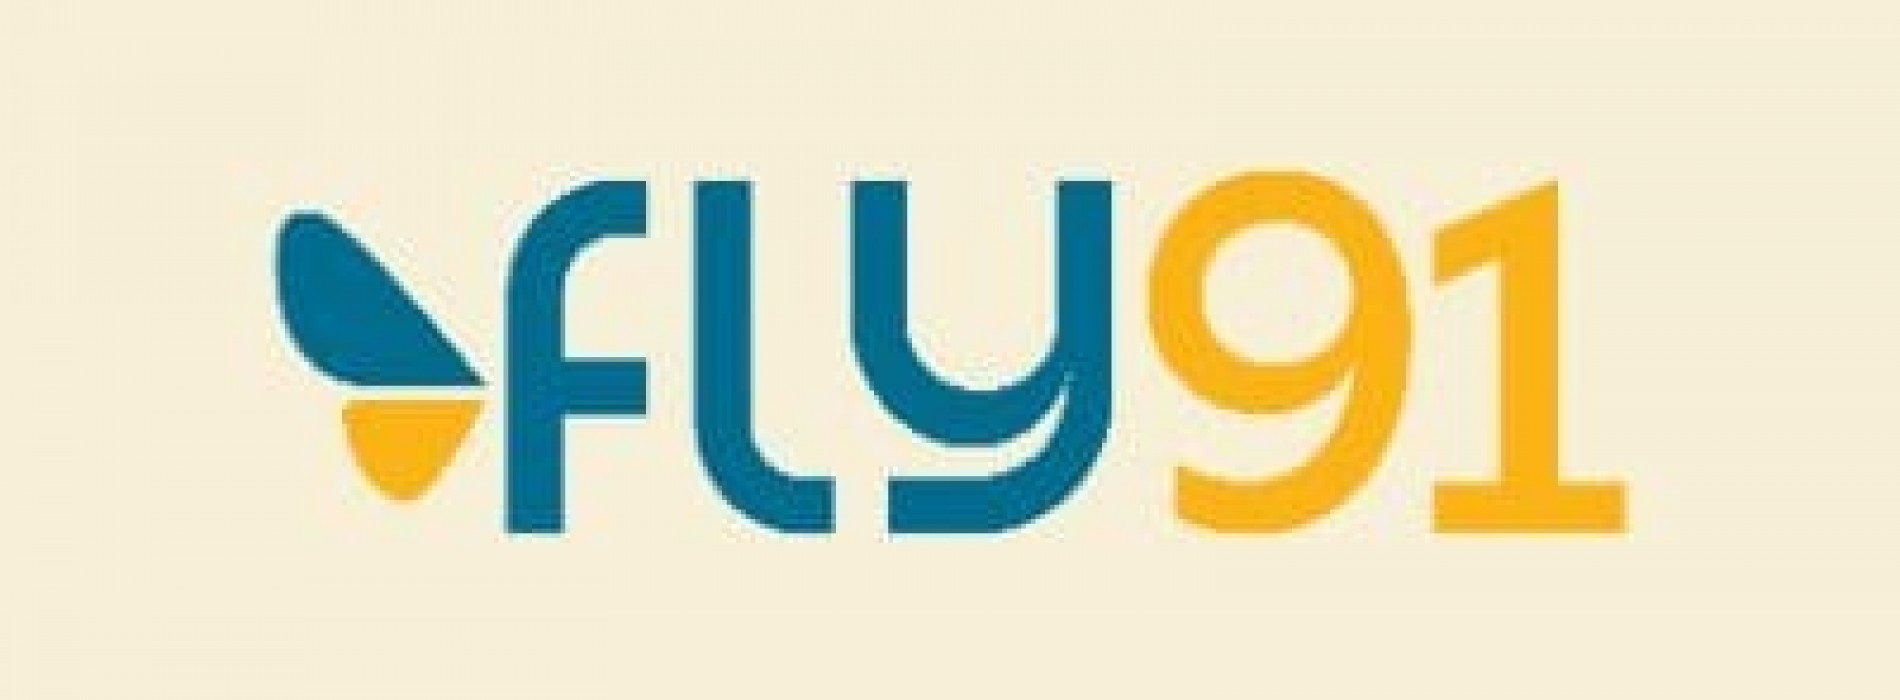 FLY91 adds Agatti, Jalgaon to its network